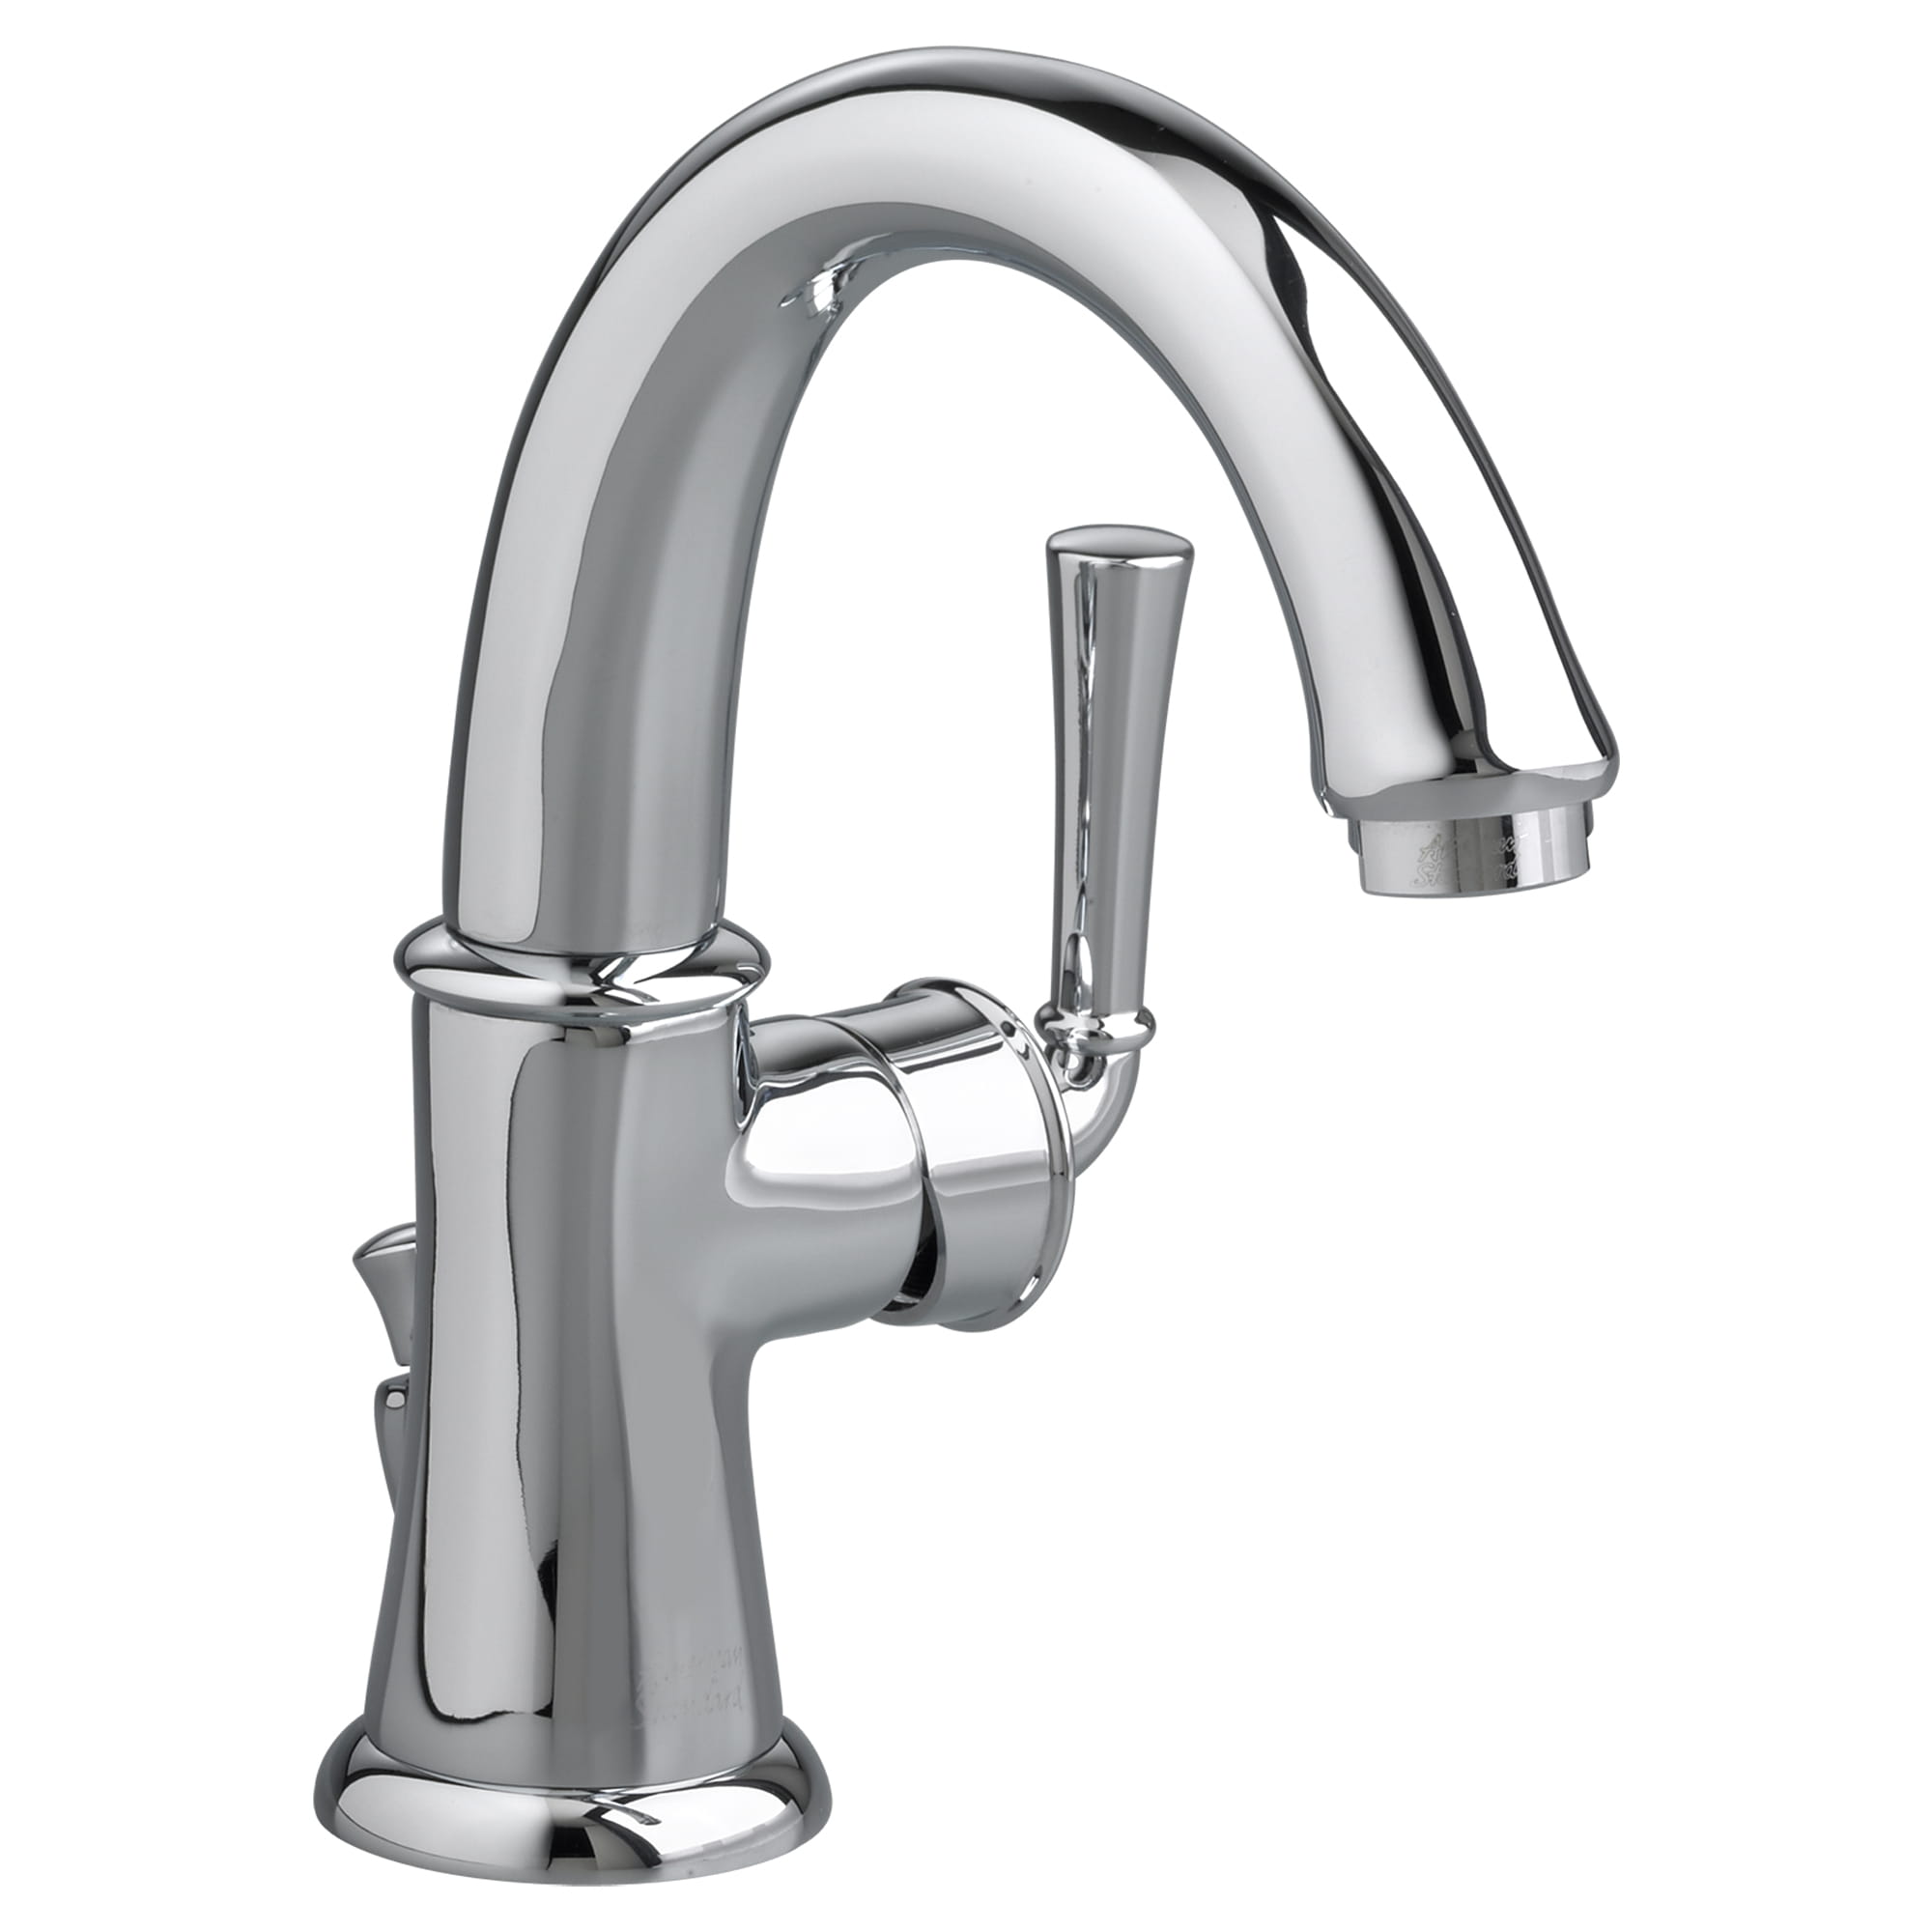 Portsmouth Single Hole Single Handle High Arc Bathroom Faucet 12 GPM with Lever Handle CHROME